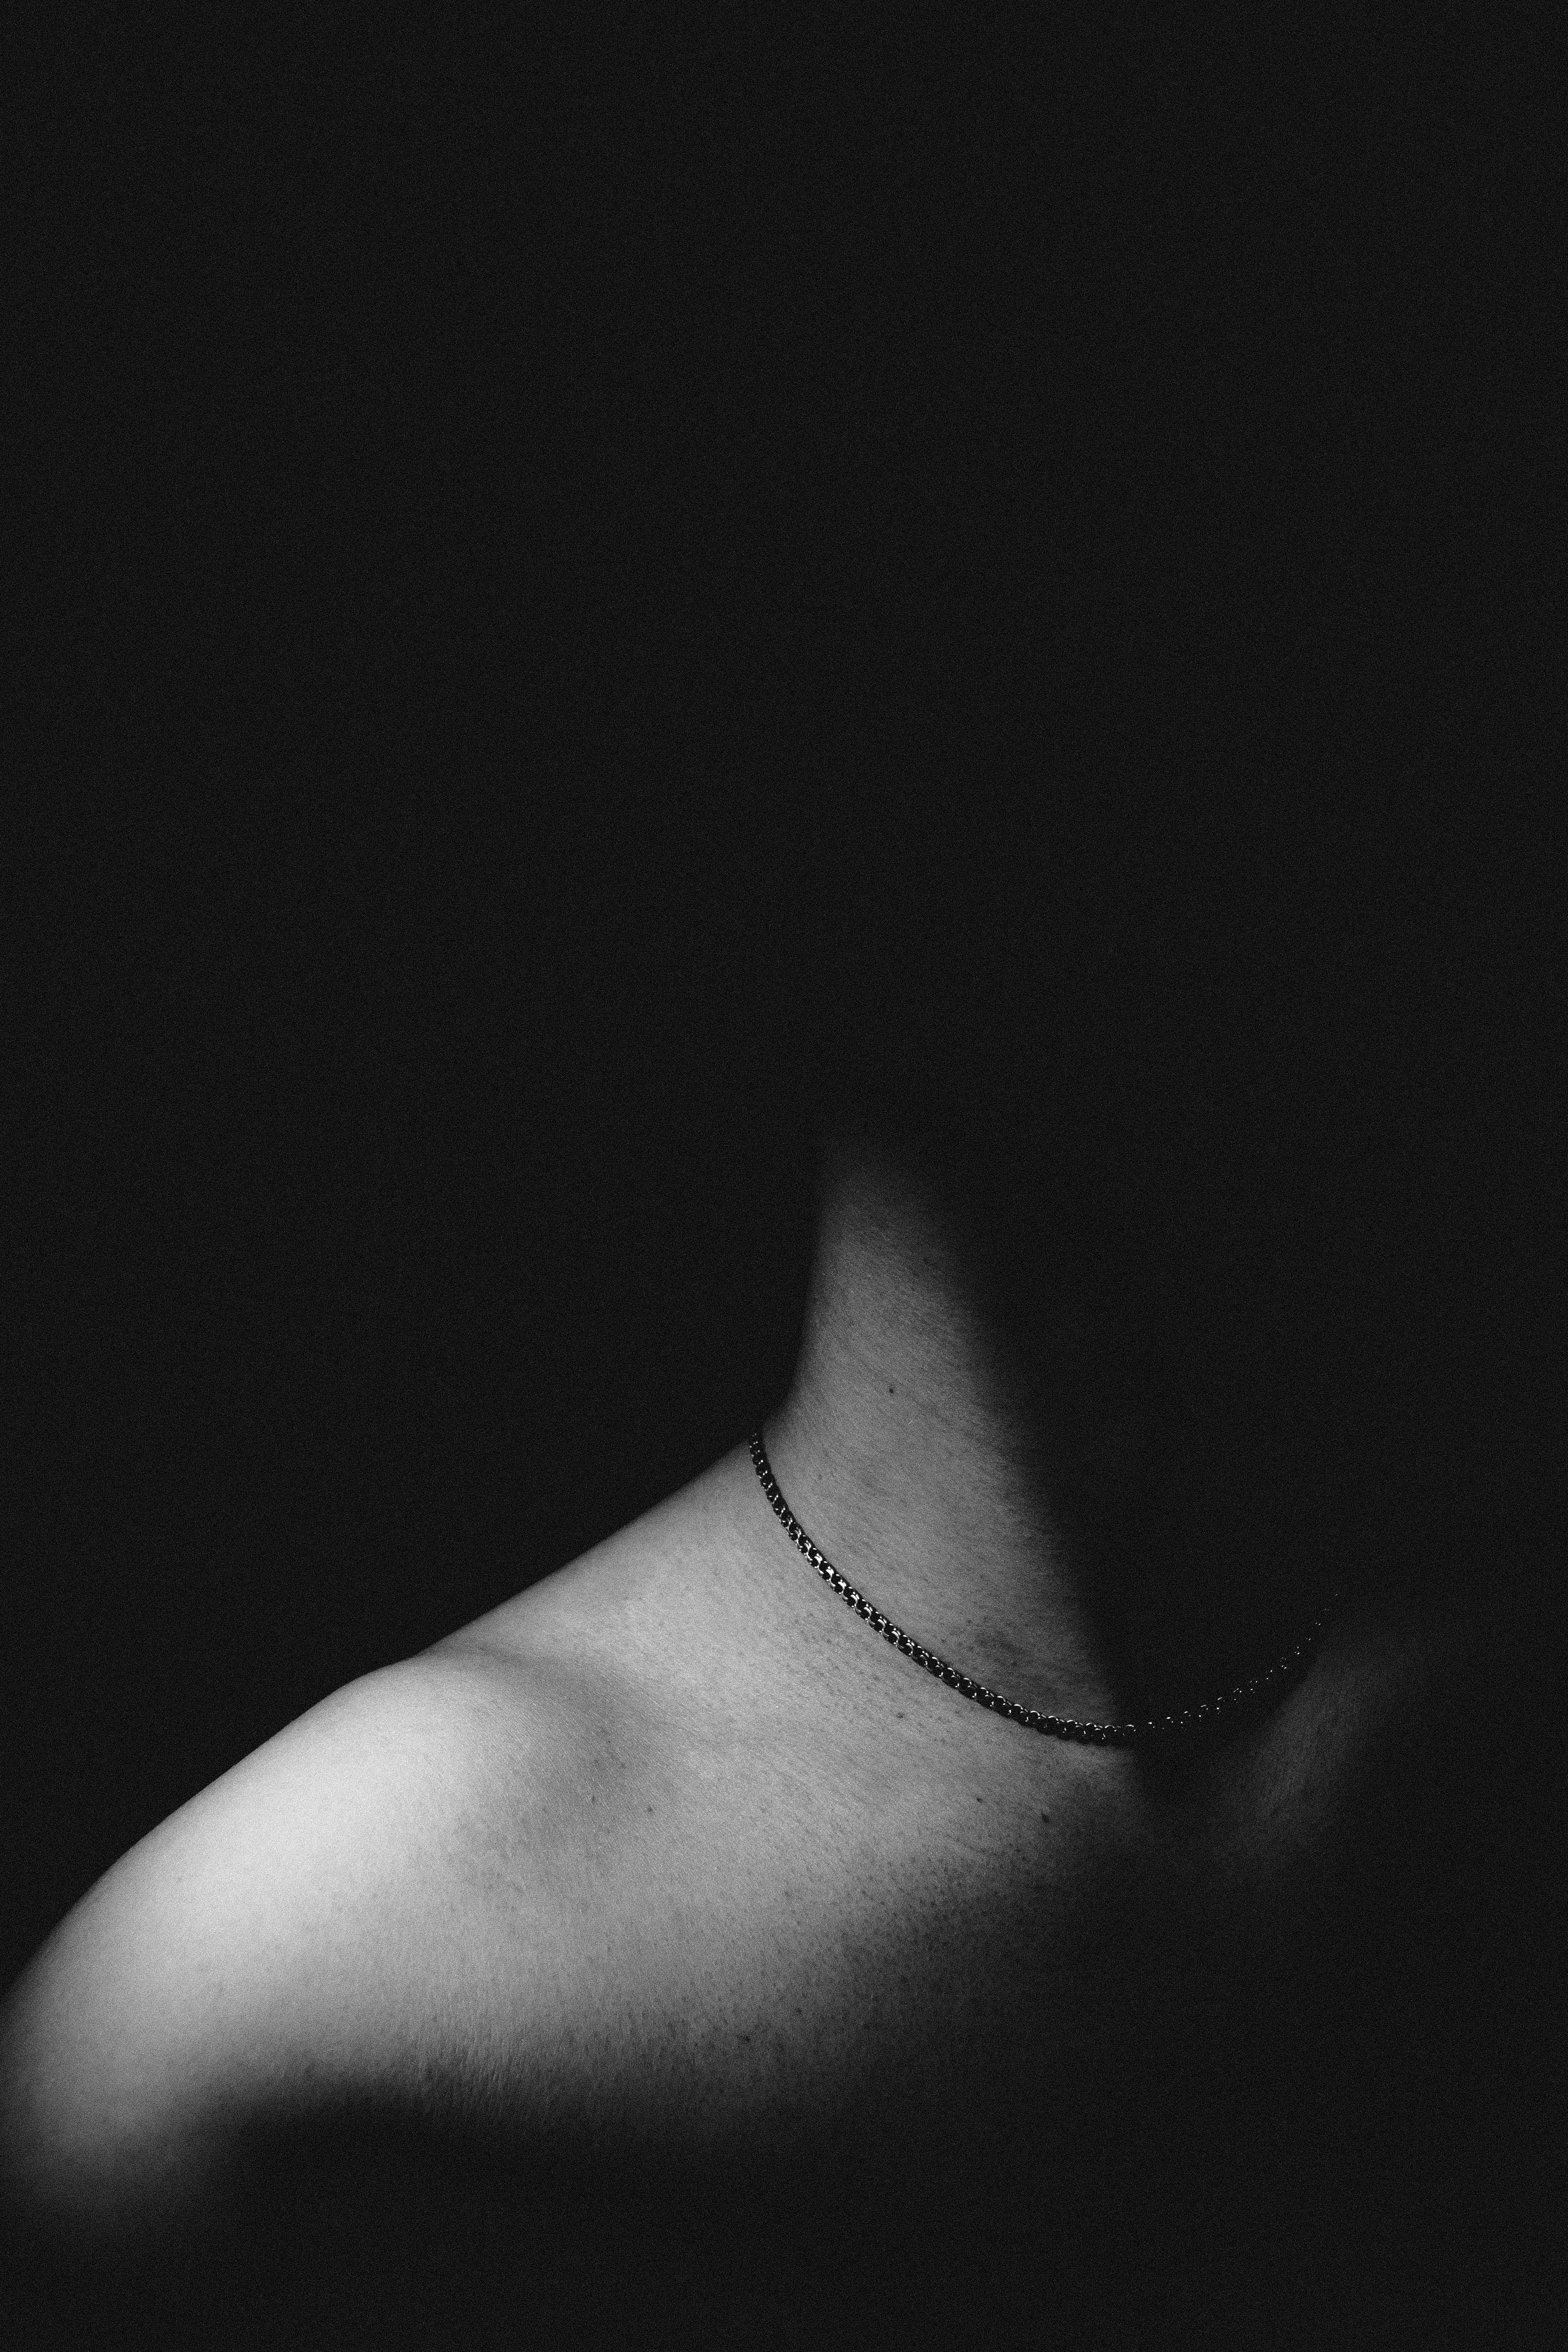 person wearing silver chain necklace